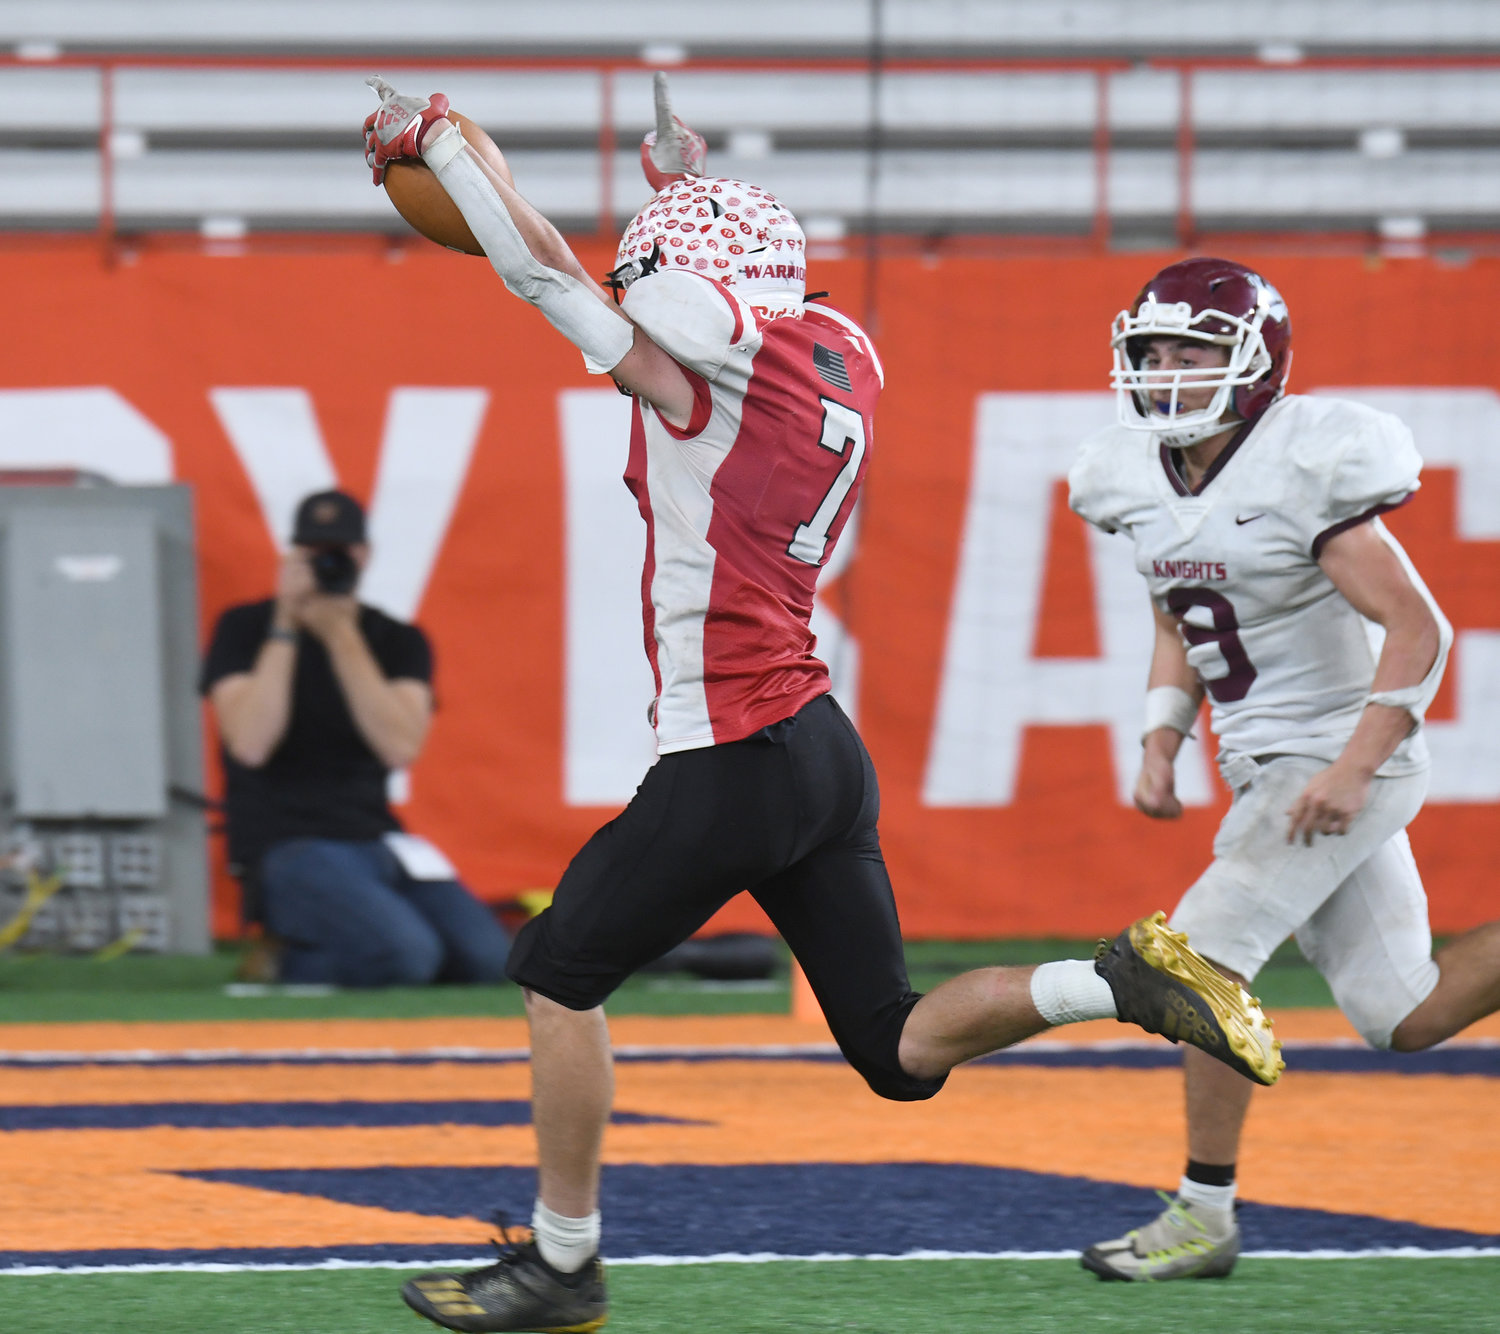 Morrisville-Eaton’s James Dapson III scores the winning TD ahead of Frankfort-Schuyler’s Martino Rocco in the Section III 8-man game at the JMA Wirelsss Dome in Syracuse. Morrisville-Eaton claimed its first Section III title.